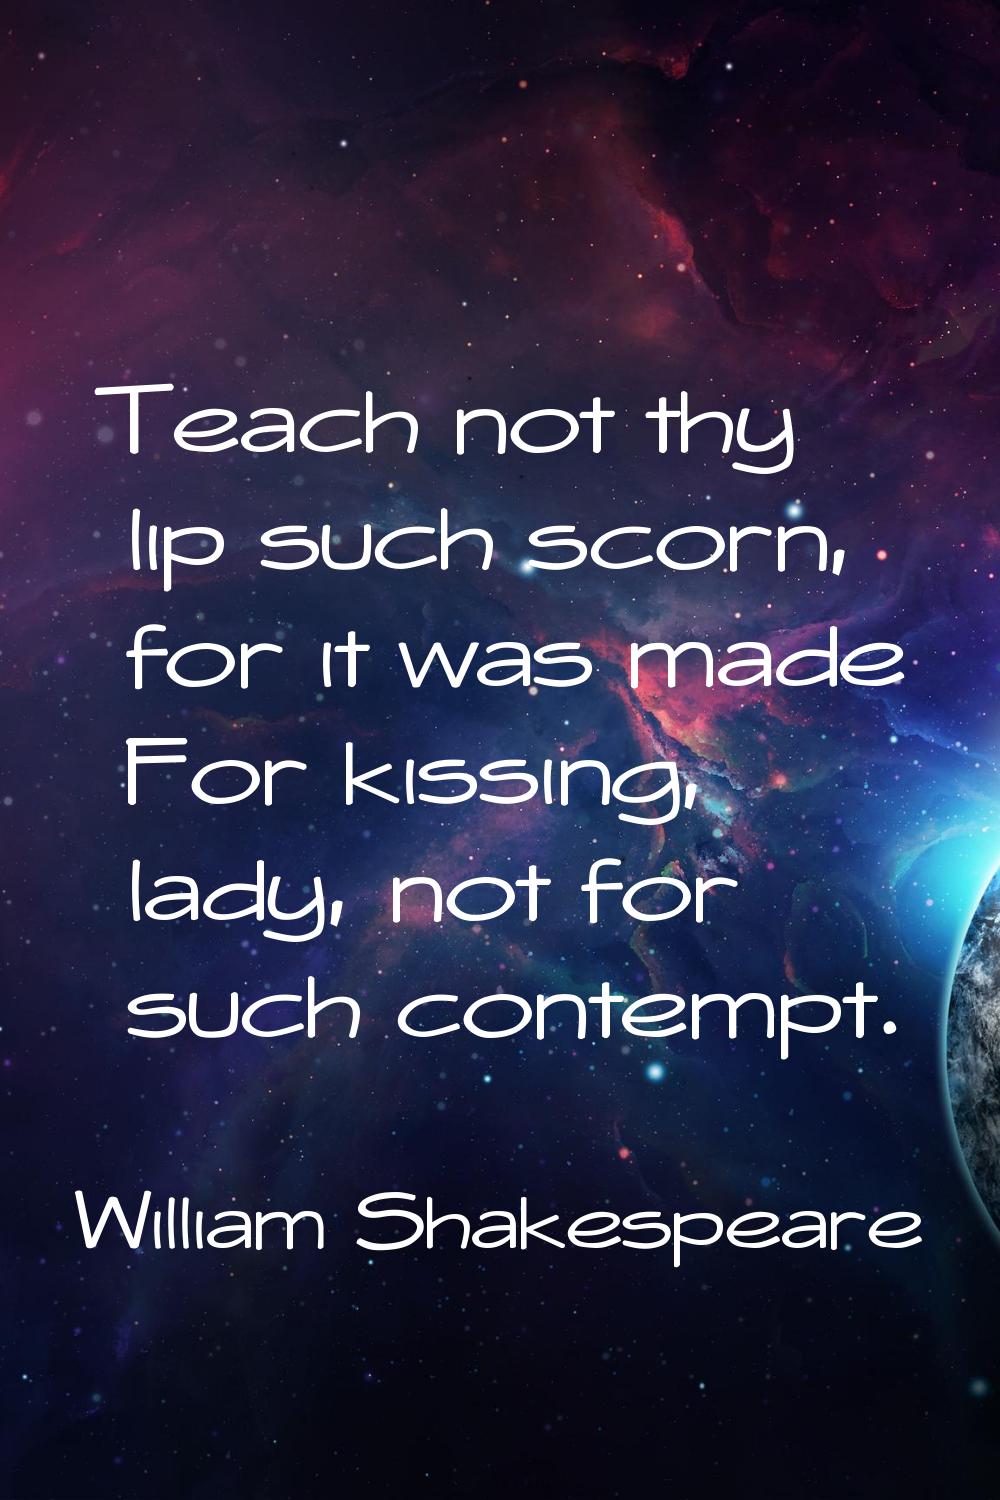 Teach not thy lip such scorn, for it was made For kissing, lady, not for such contempt.